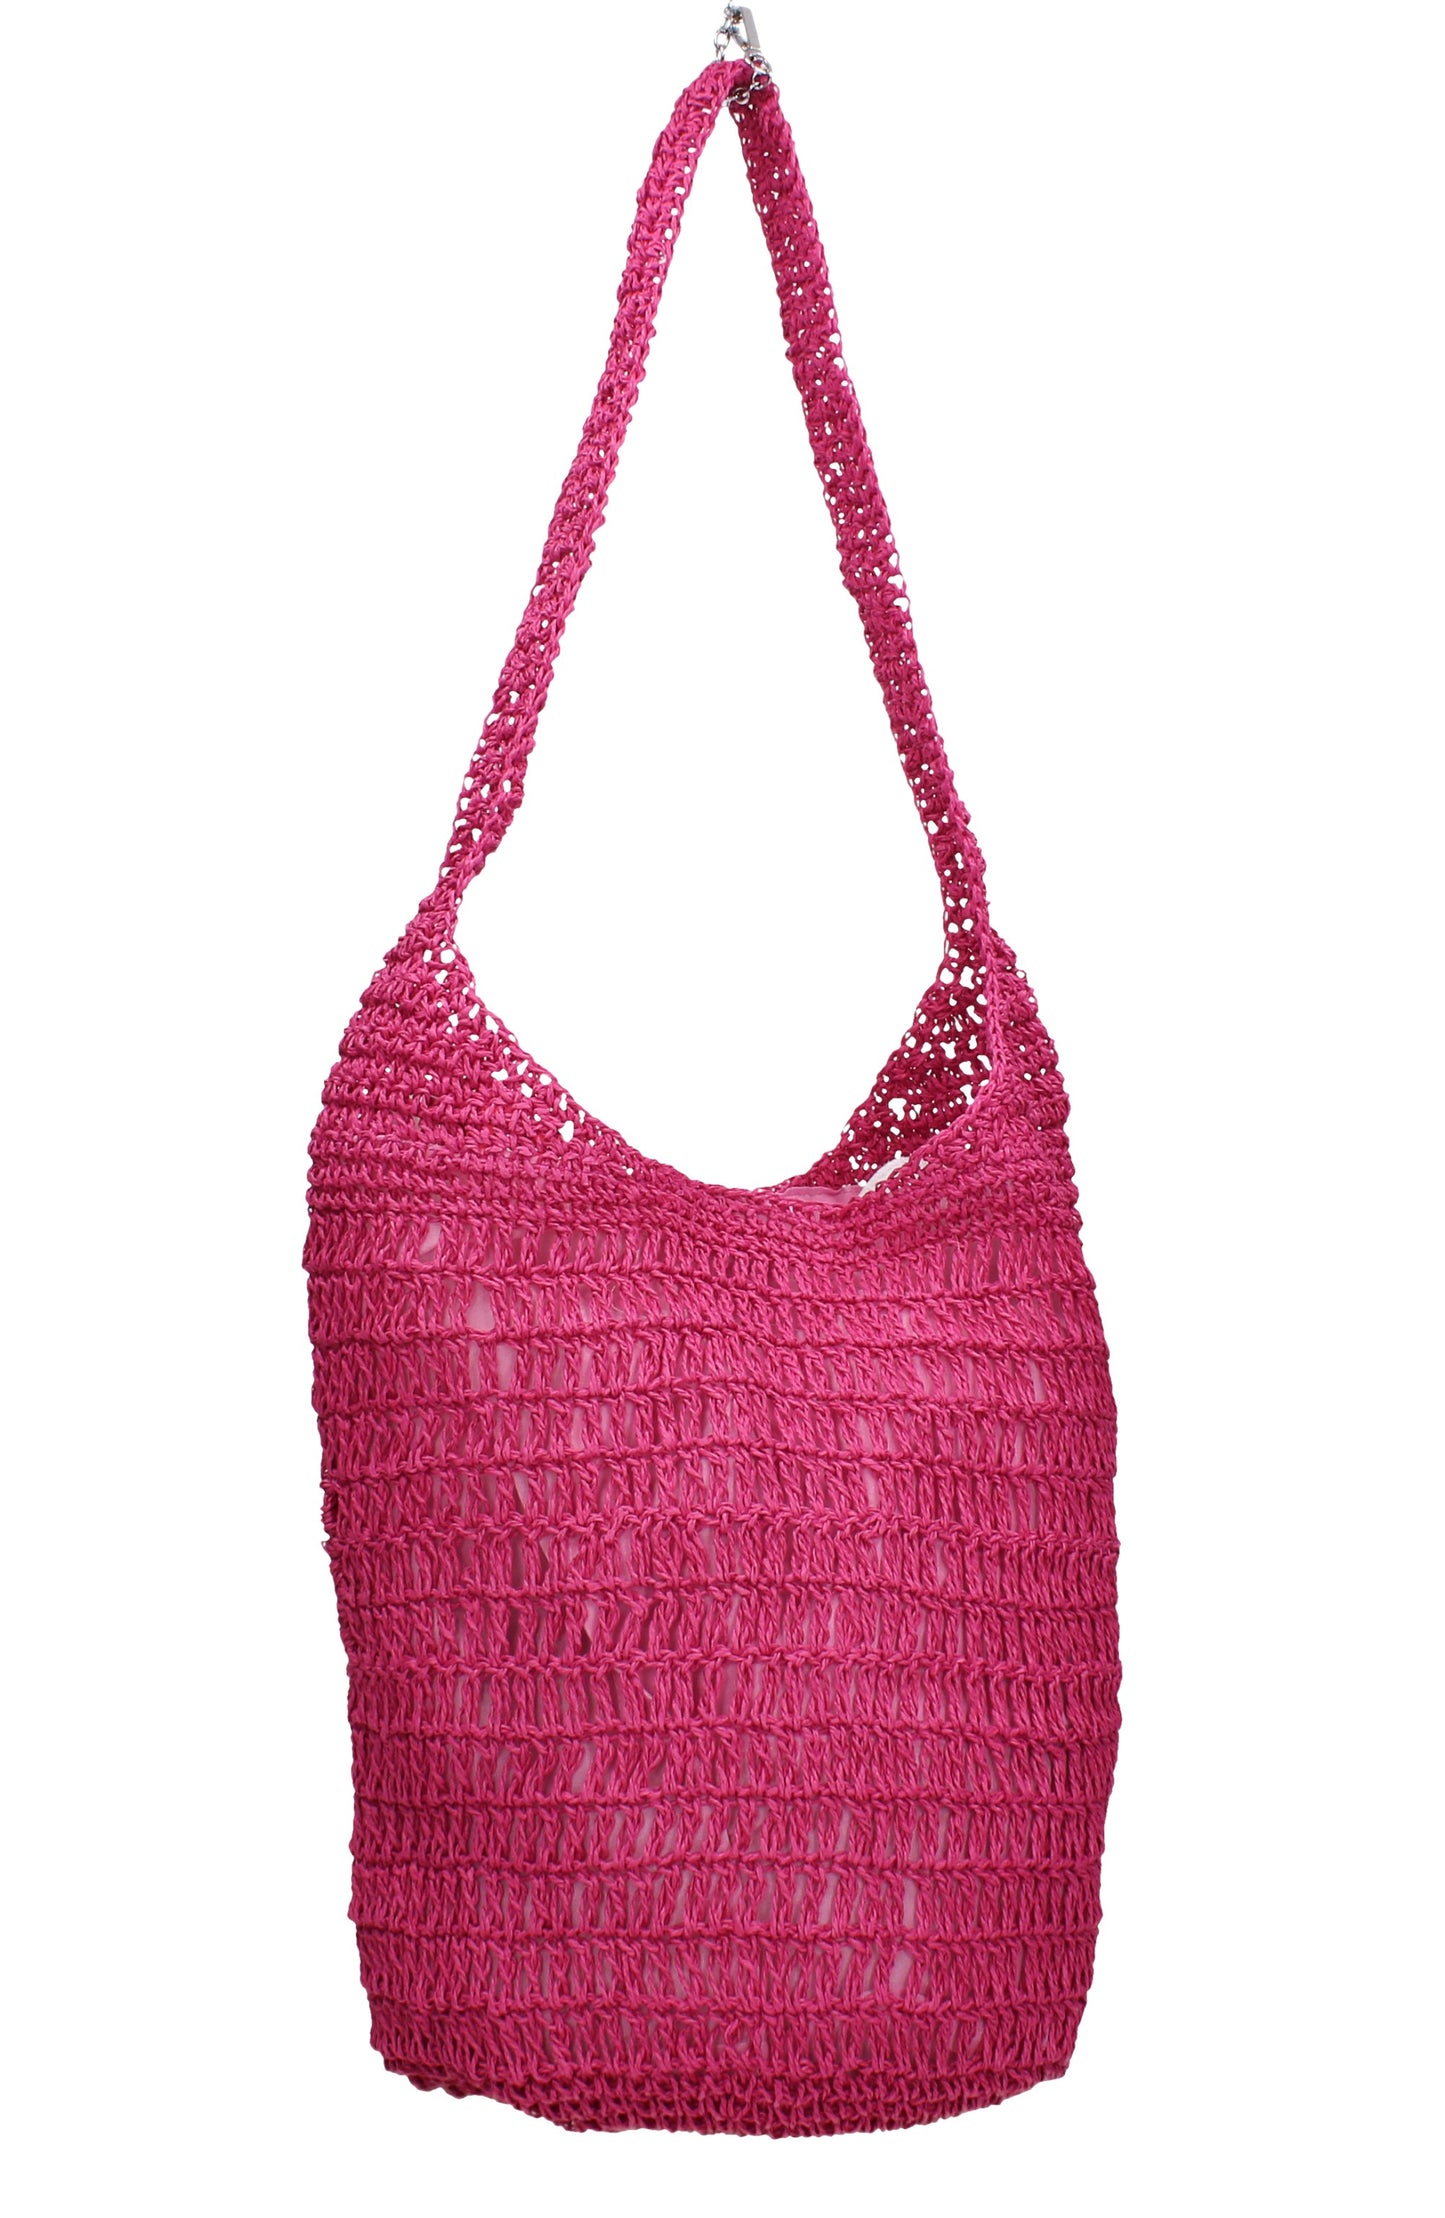 Swanky Swans Soft Bucket Style Pink Beach Tote Bag Summer HandbagPerfect for School, Weddings, Day out!